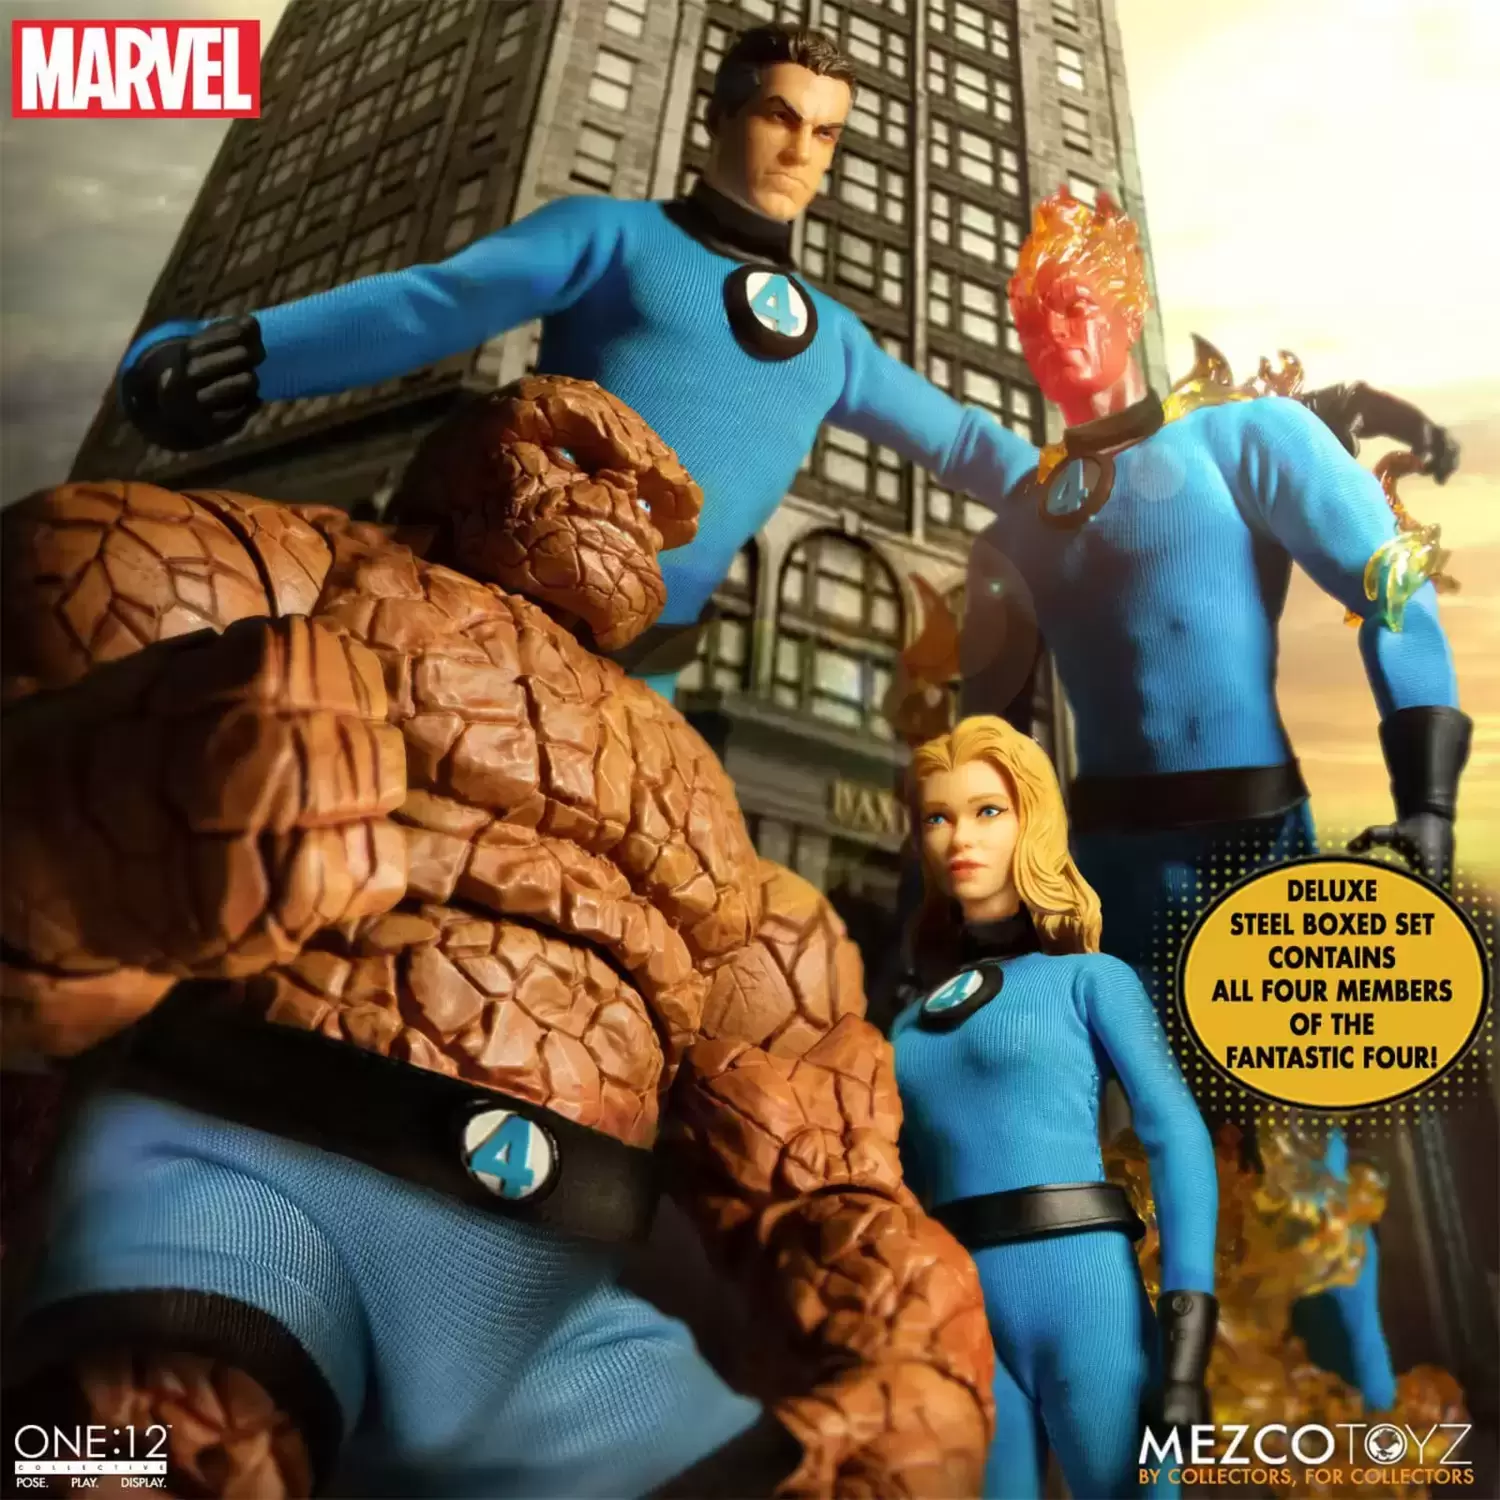 MezcoToyz - Fantastic Four Deluxe Steel Boxed Set - One: 12 Collective